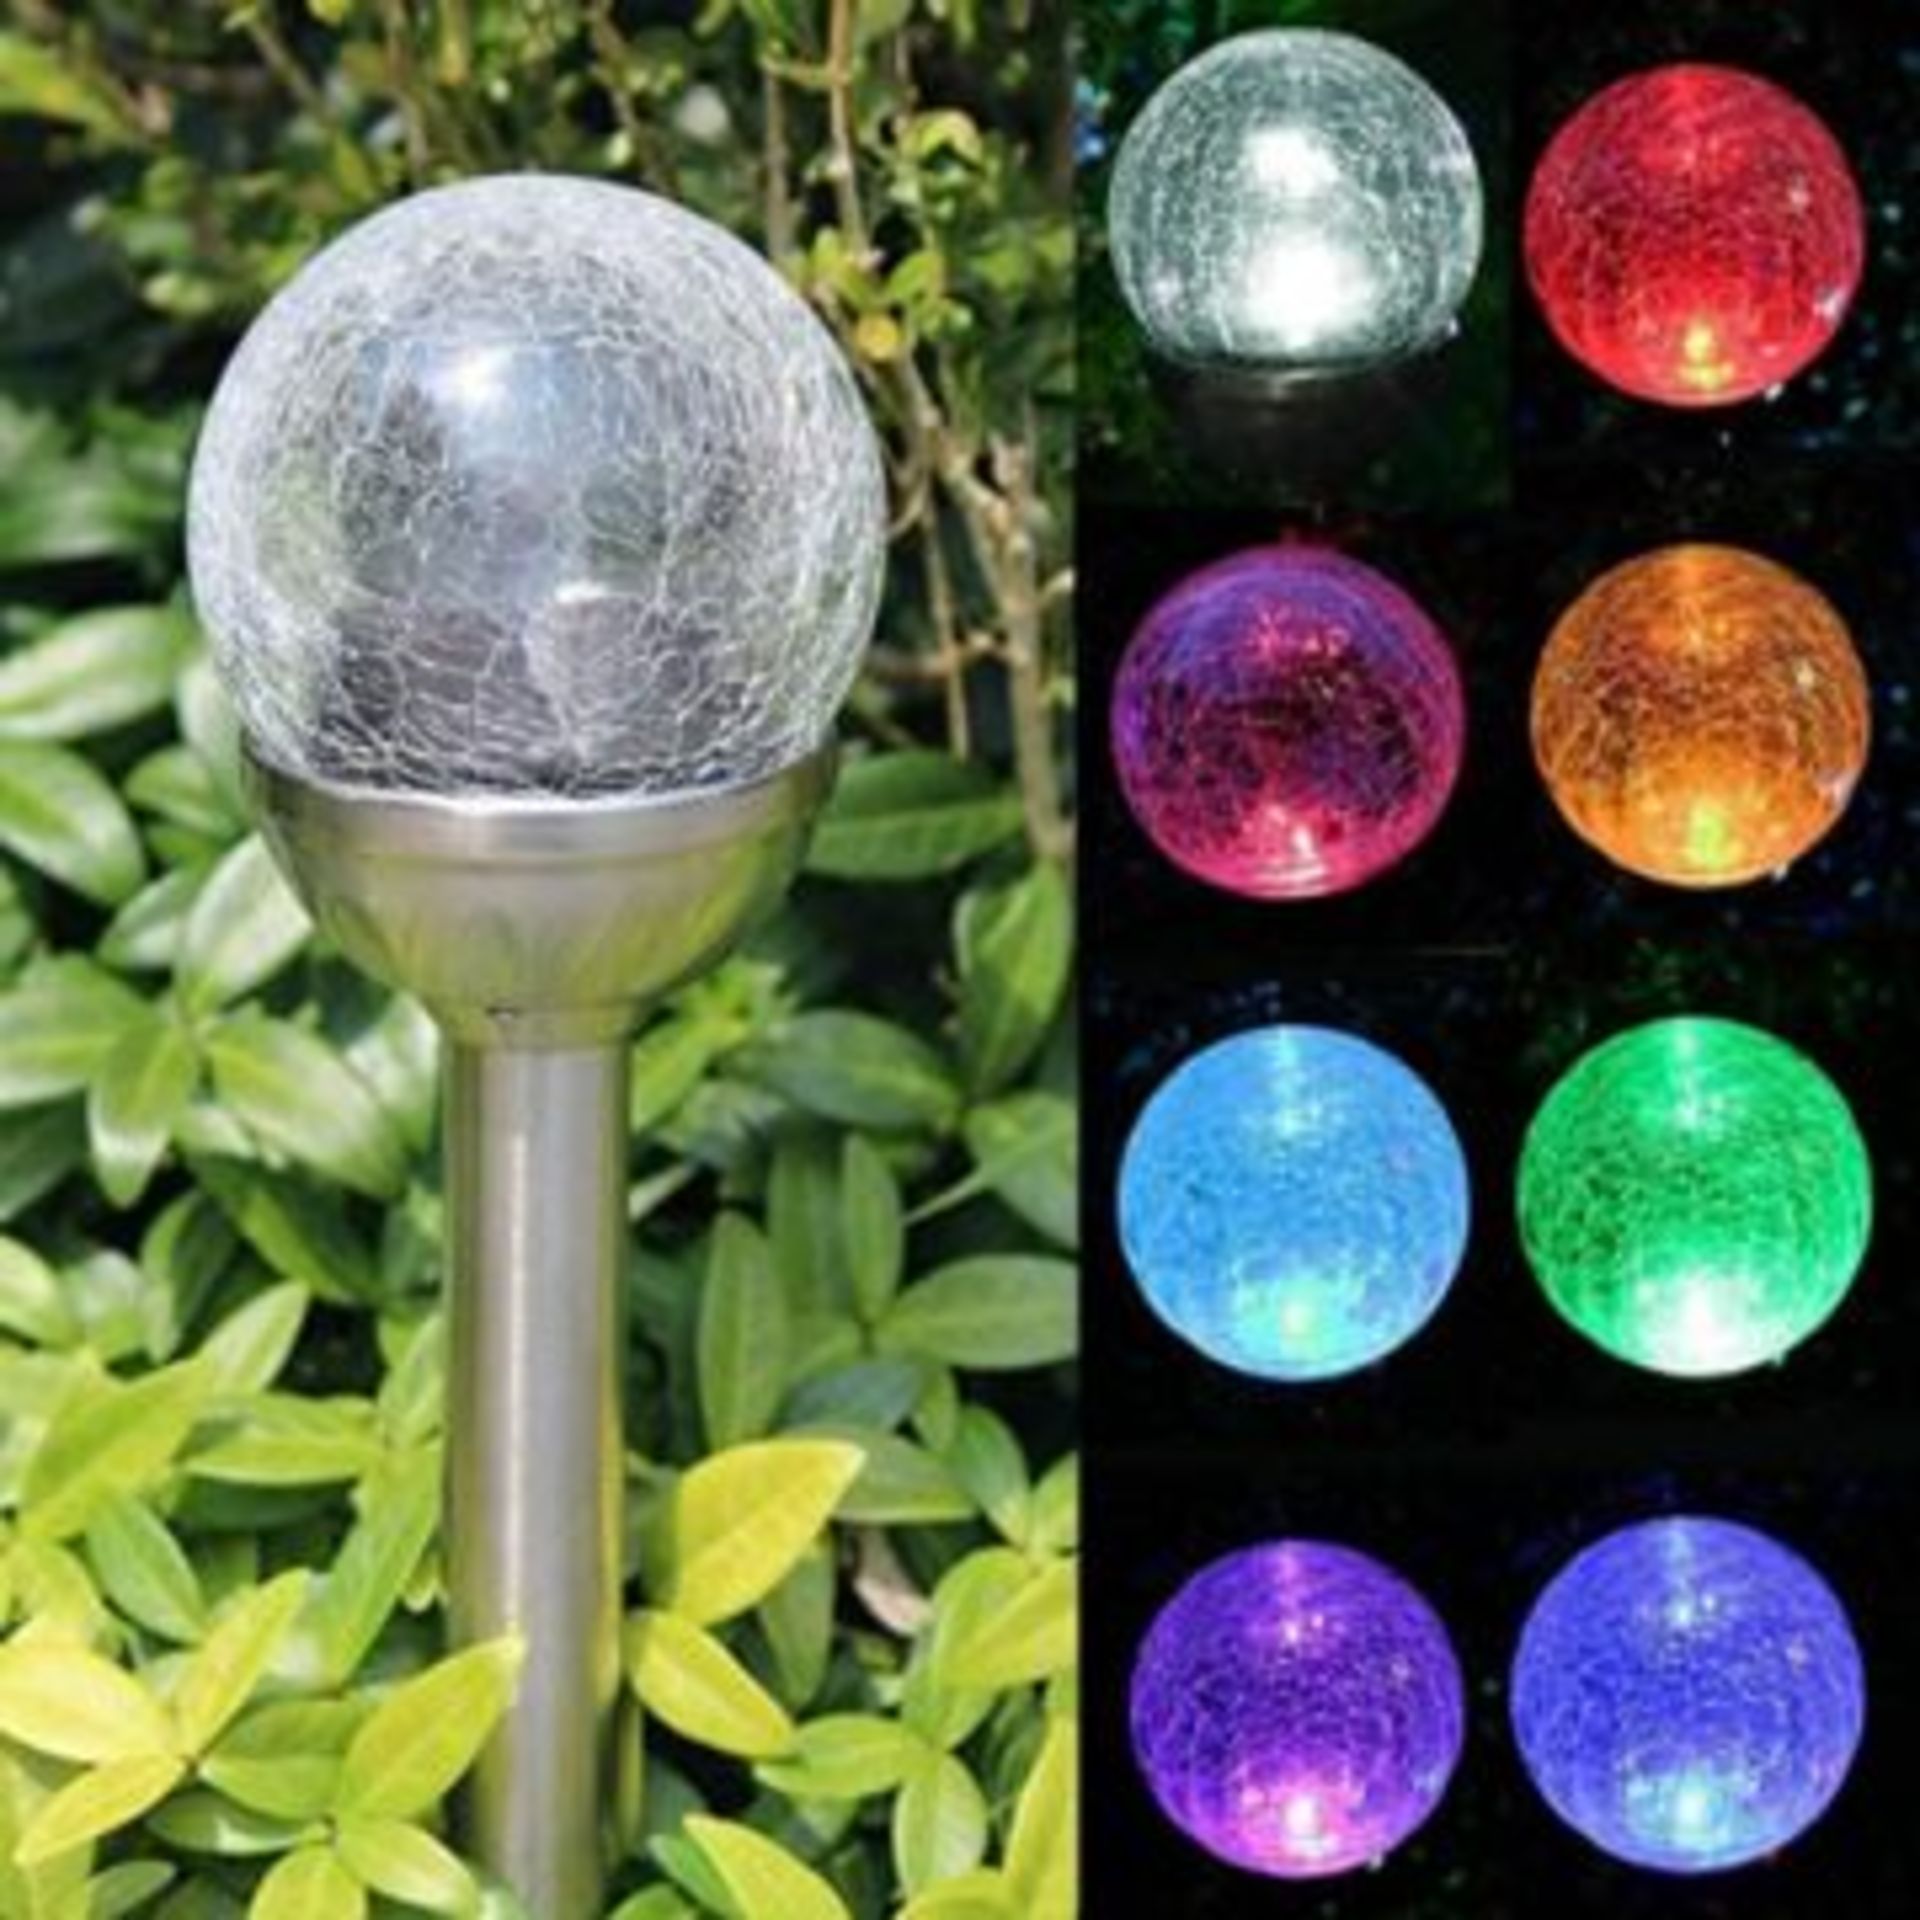 3 x Solar Lights Outdoor, Cracked Glass Ball LED Garden Lights, Landscape/Pathway Lights For Path - Image 2 of 2